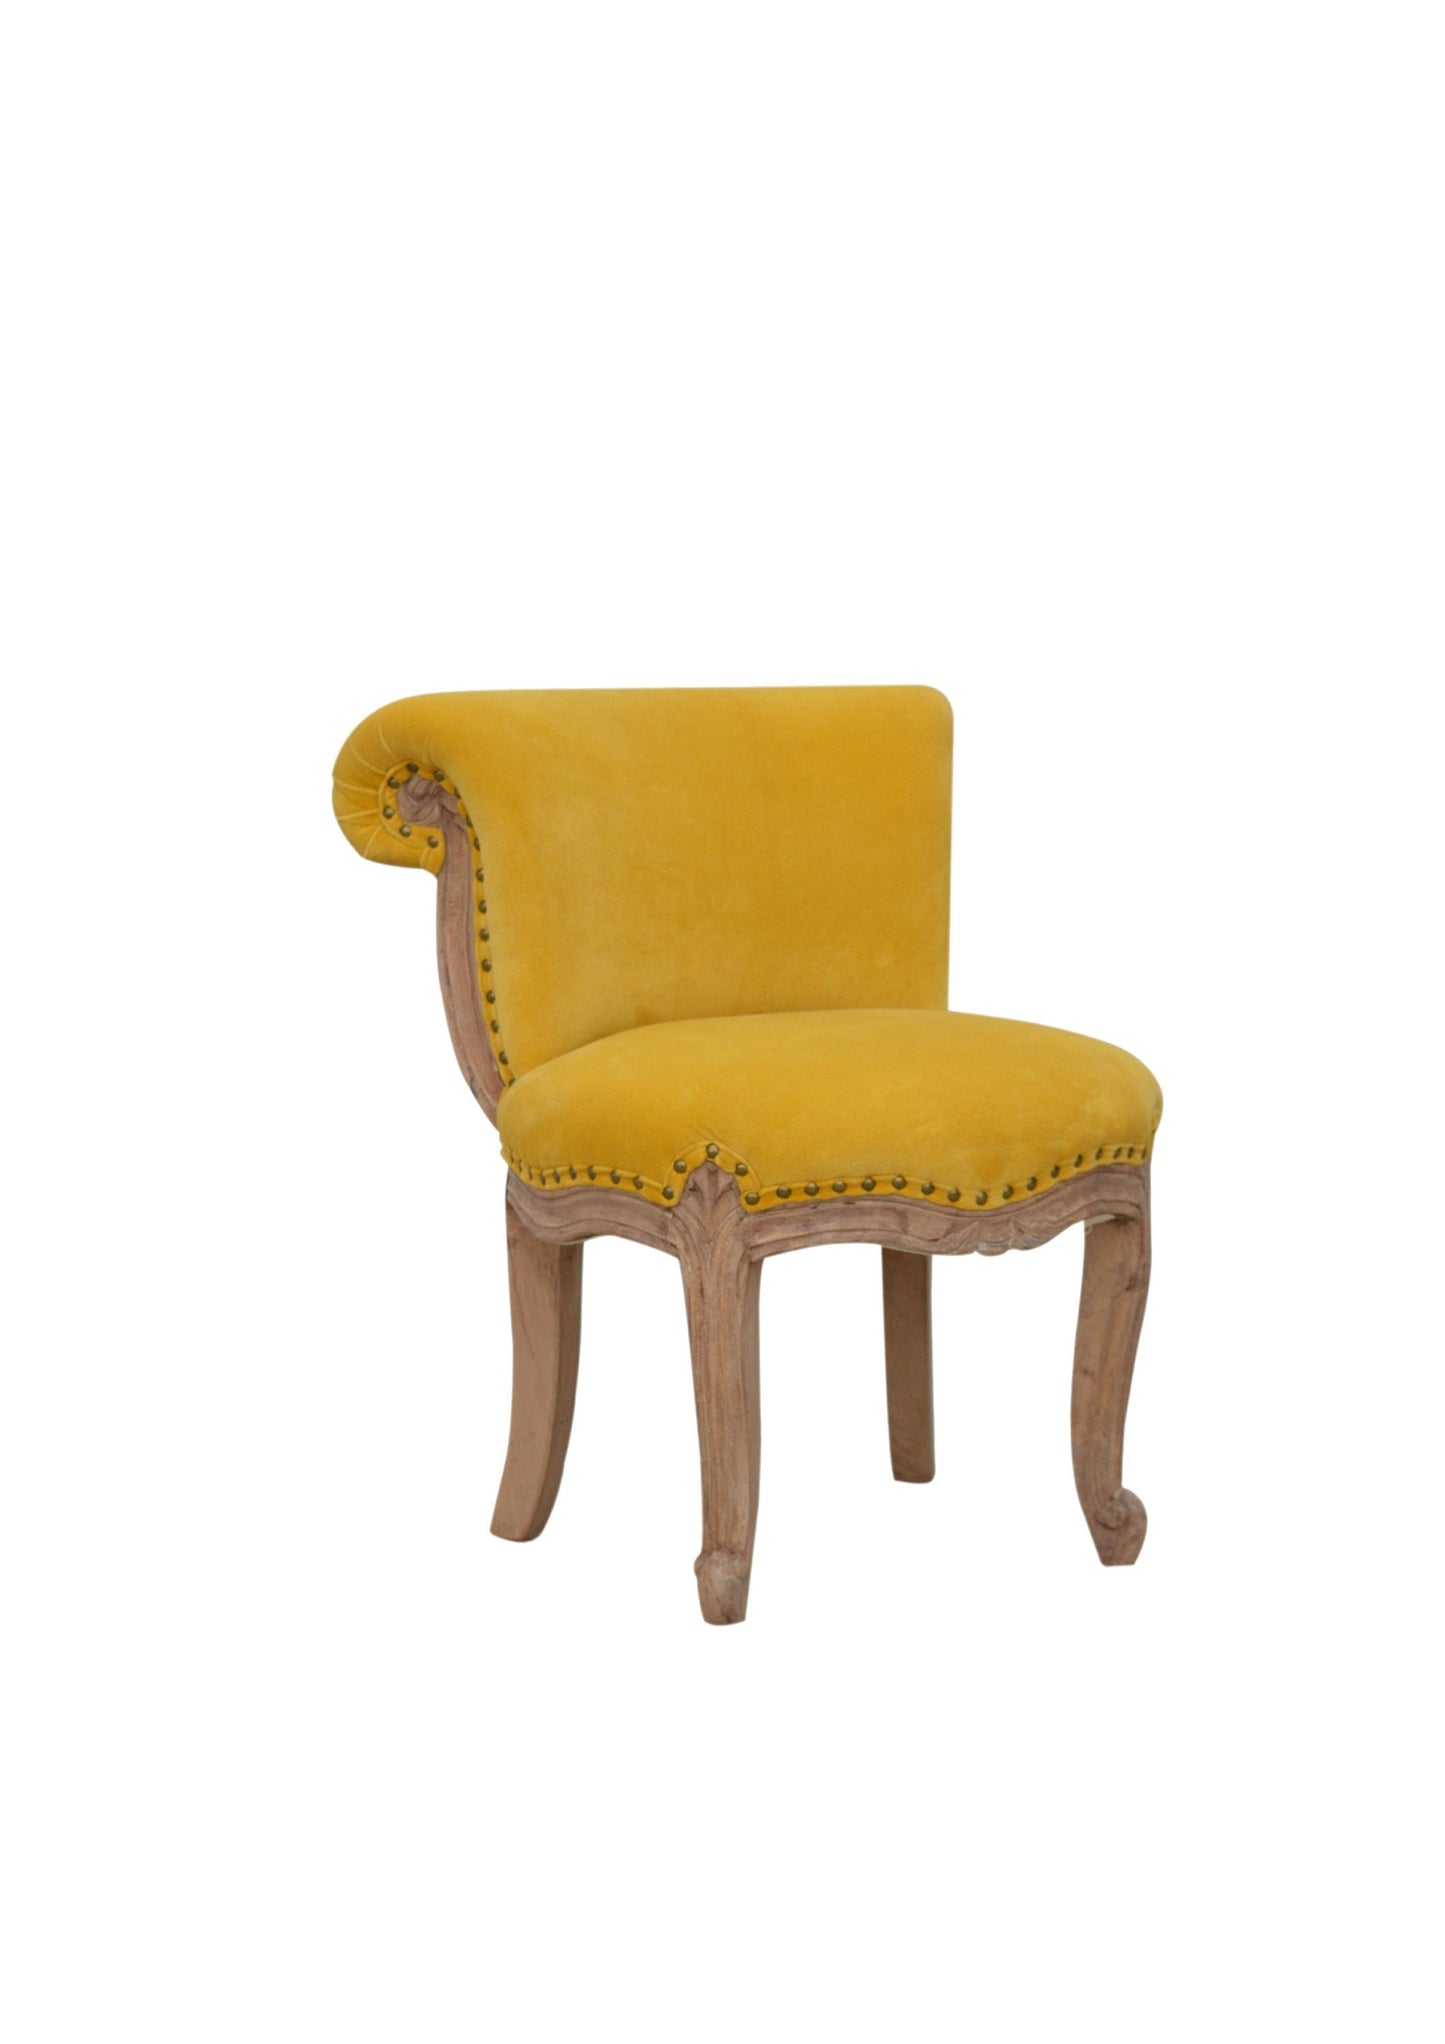 Occasional Studded Accent Chair, French Style, Shabby Chic Chair for Bedroom, Hallway, Living Room in Yellow, Orange, Green, Blue and Tweed